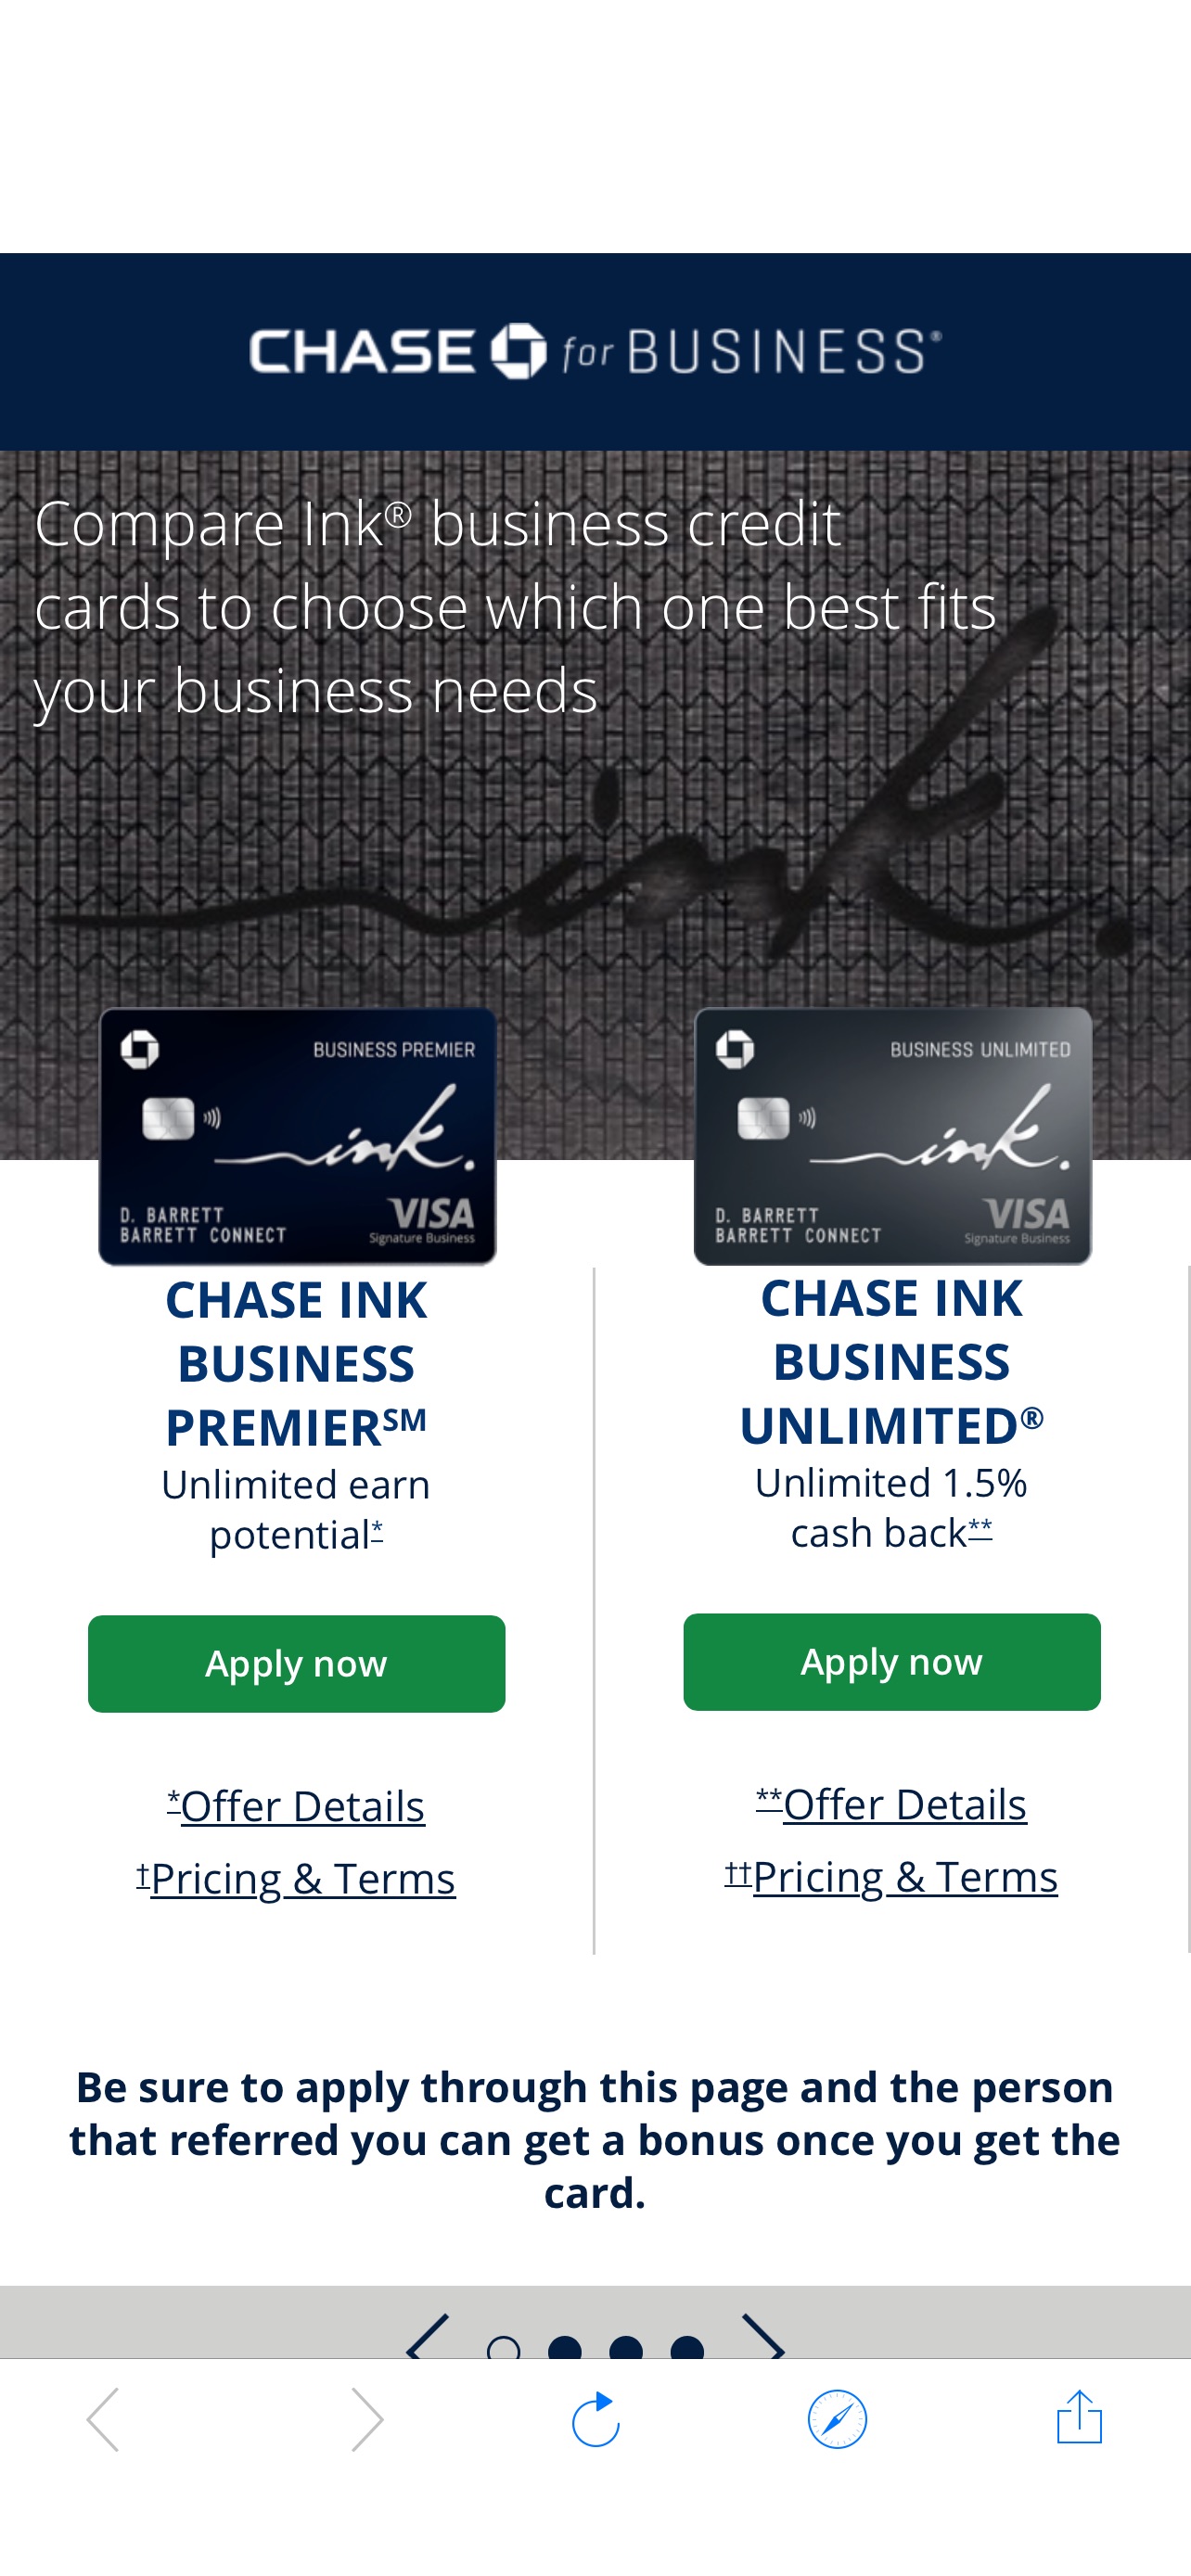 Compare Business Credit Cards | Chase.com